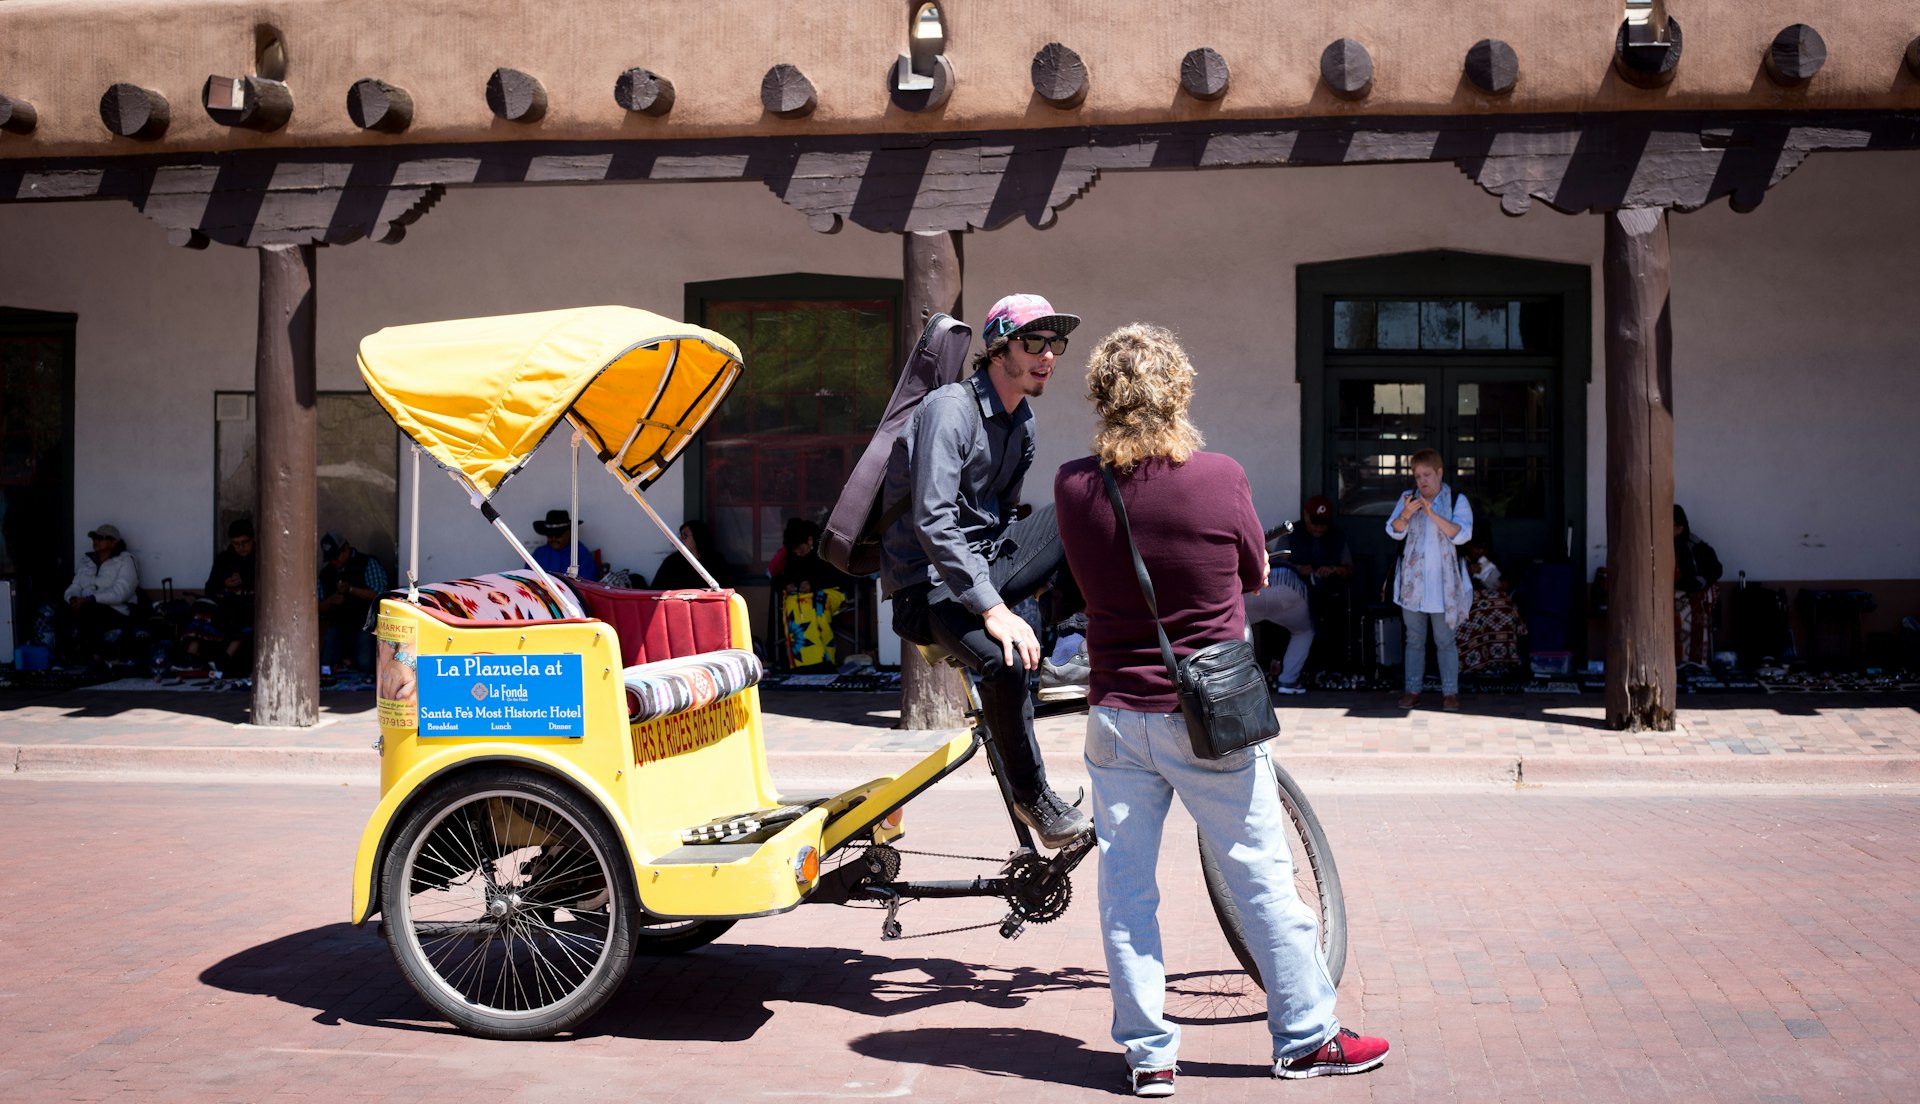 A Santa Fe pedicab outside the Palace of the Governors. The pedicab is essentially a pedal rickshaw, which is used to cycle people around the city.